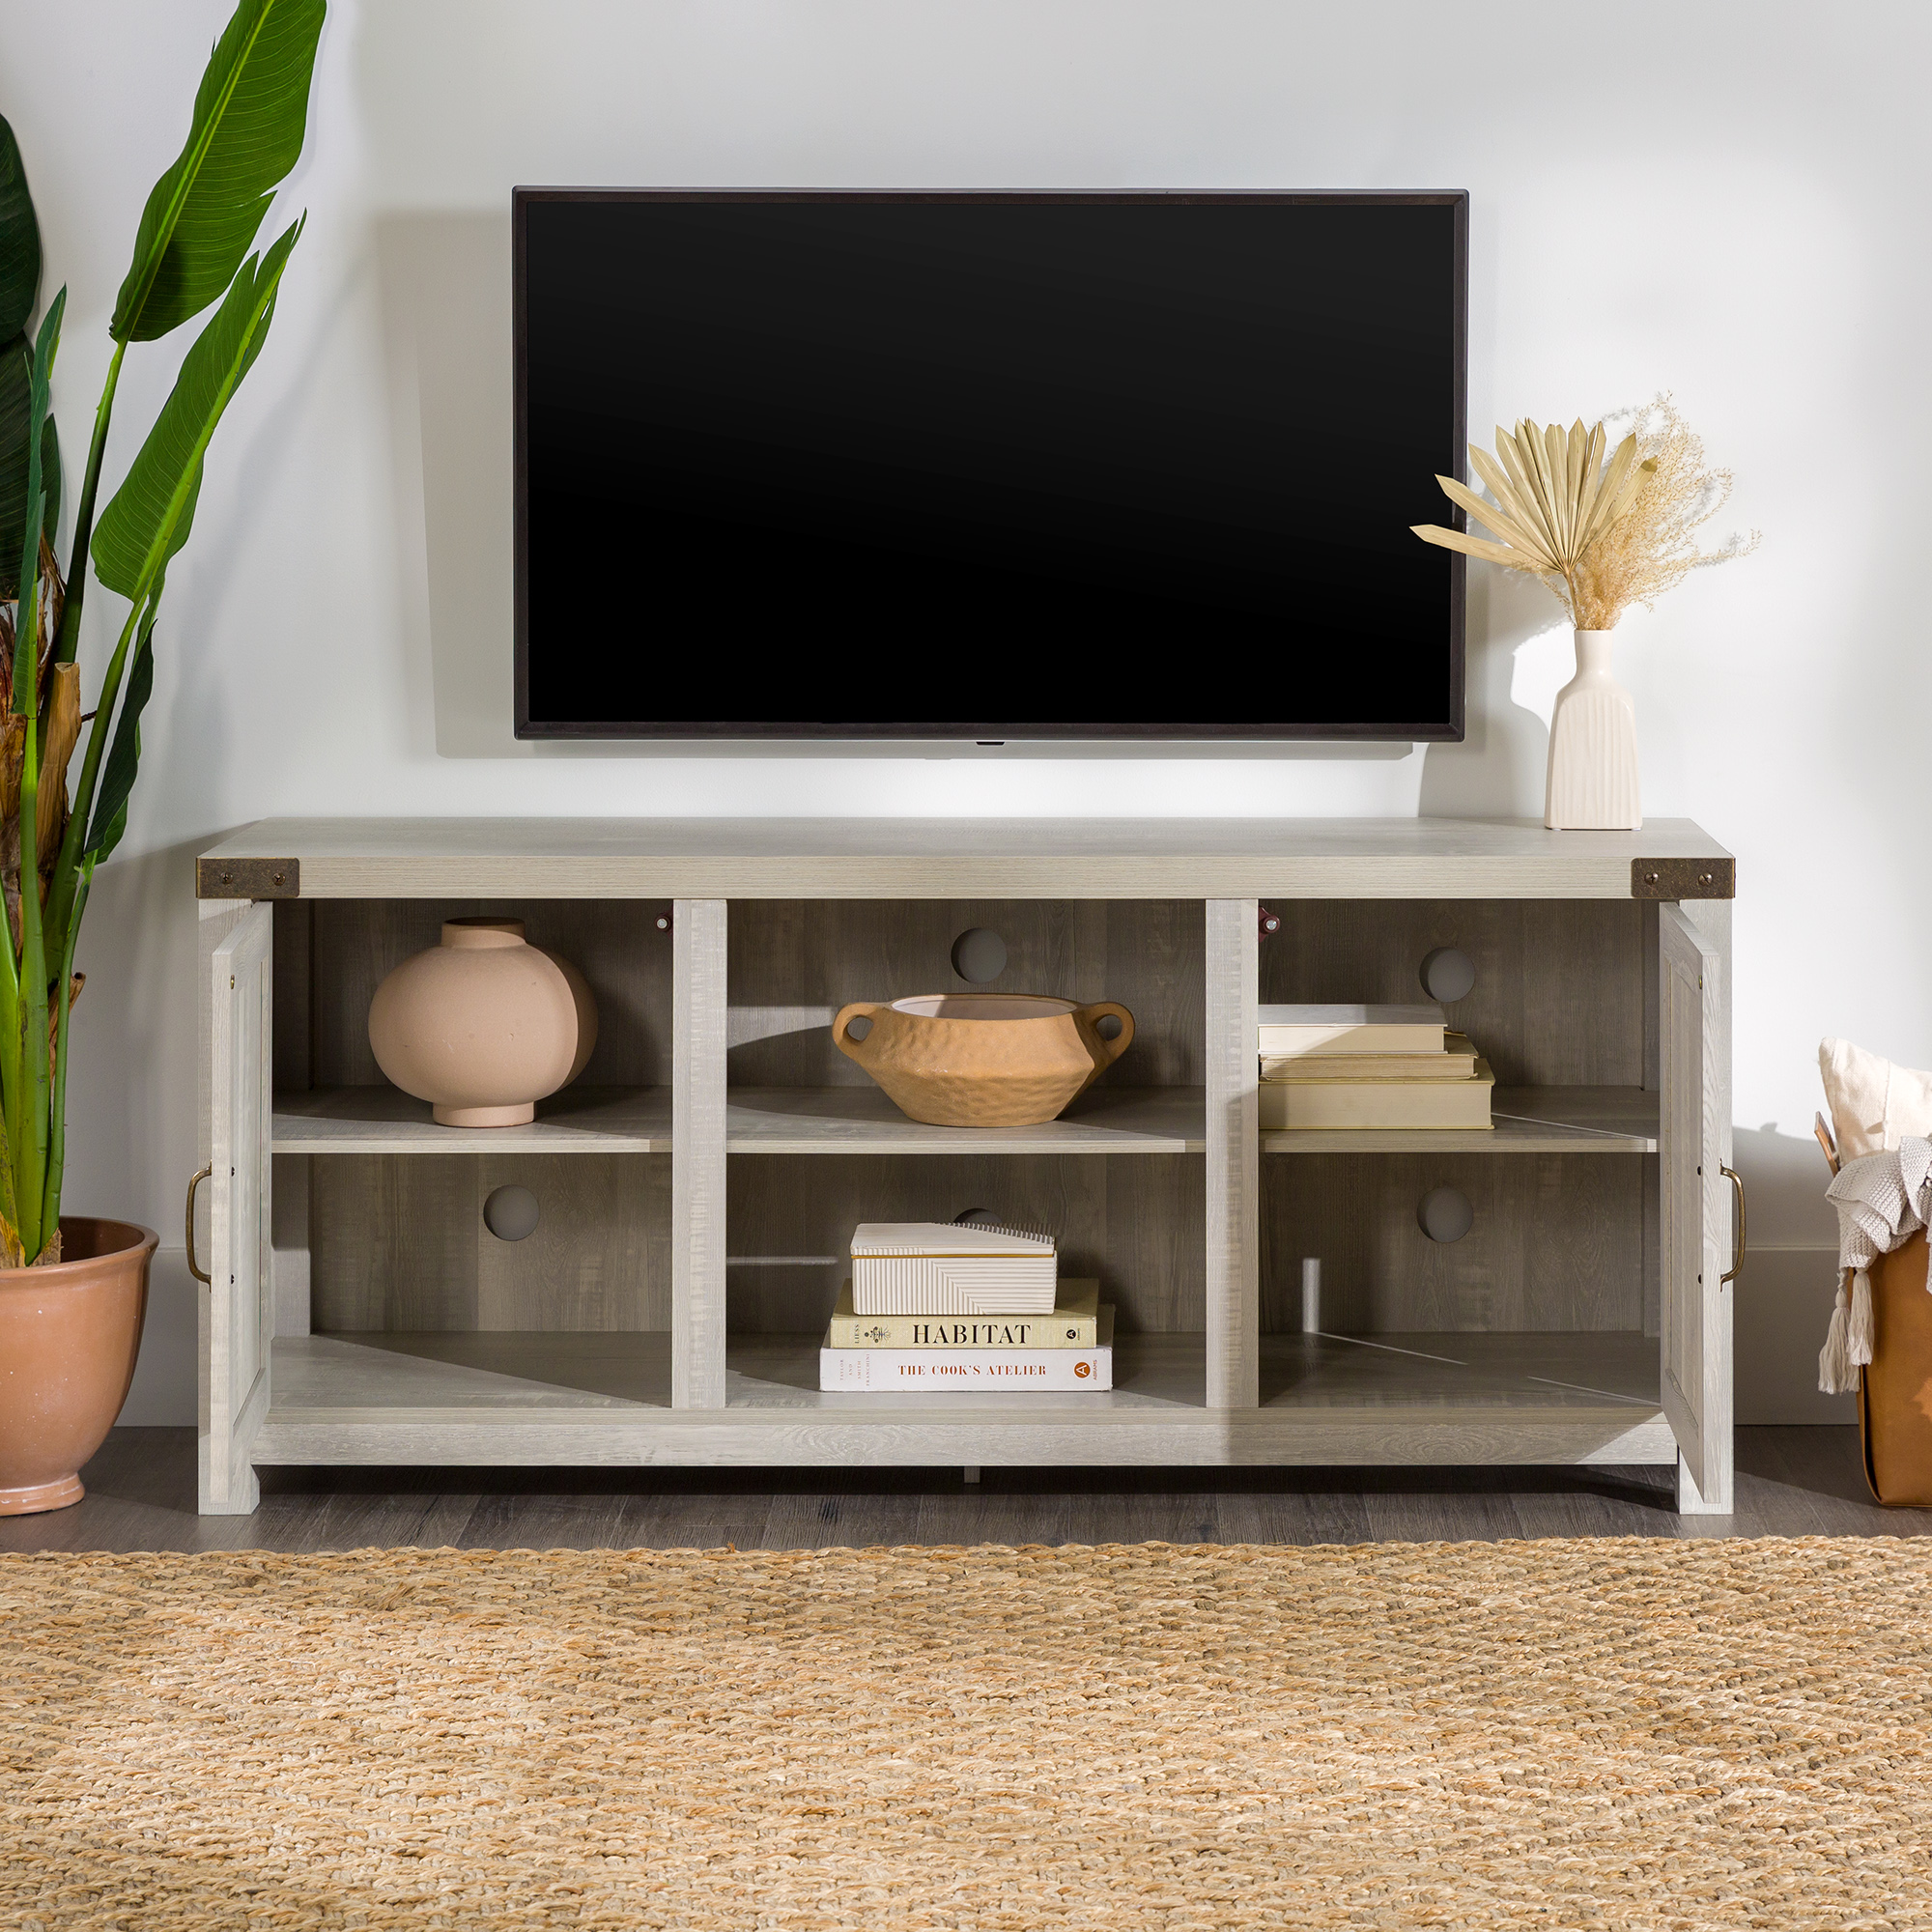 Walker Edison Modern Farmhouse Barn Door TV Stand for TVs up to 65", Stone Grey - image 5 of 22